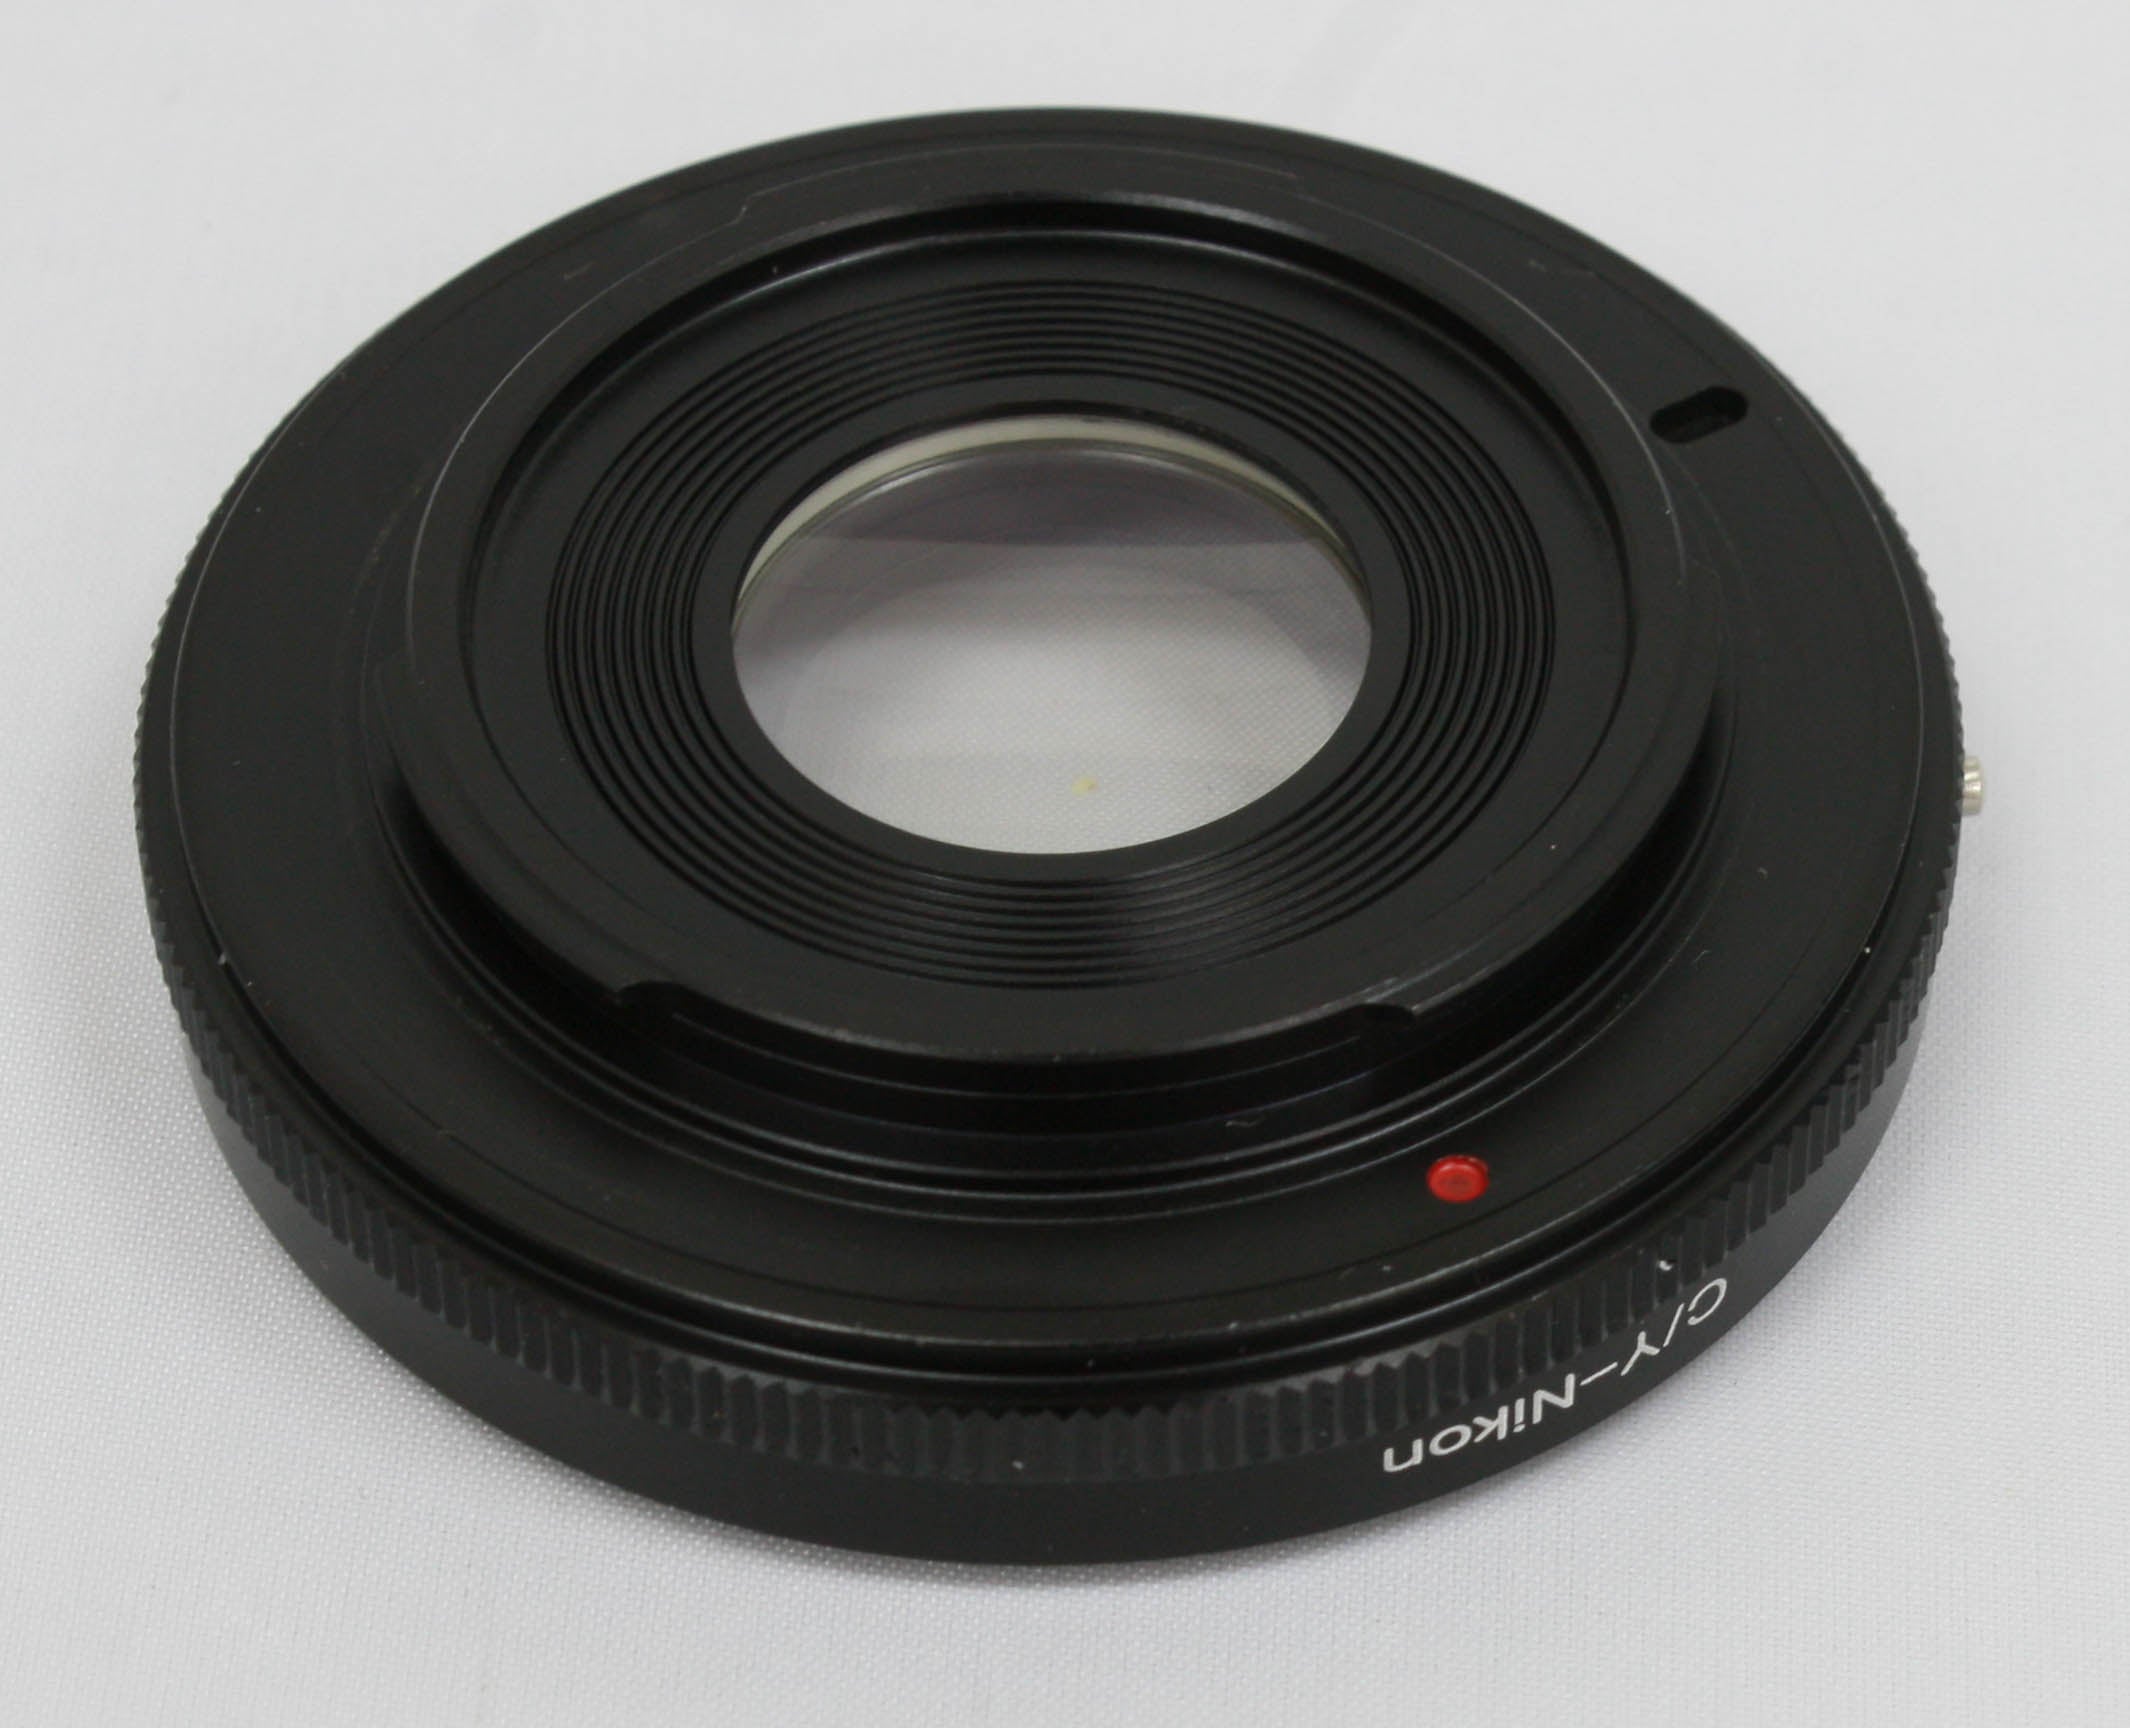 Contax Yashica C/Y mount lens to Nikon F mount adapter glass infinity - Df D4S D610 D750 D810 D5500